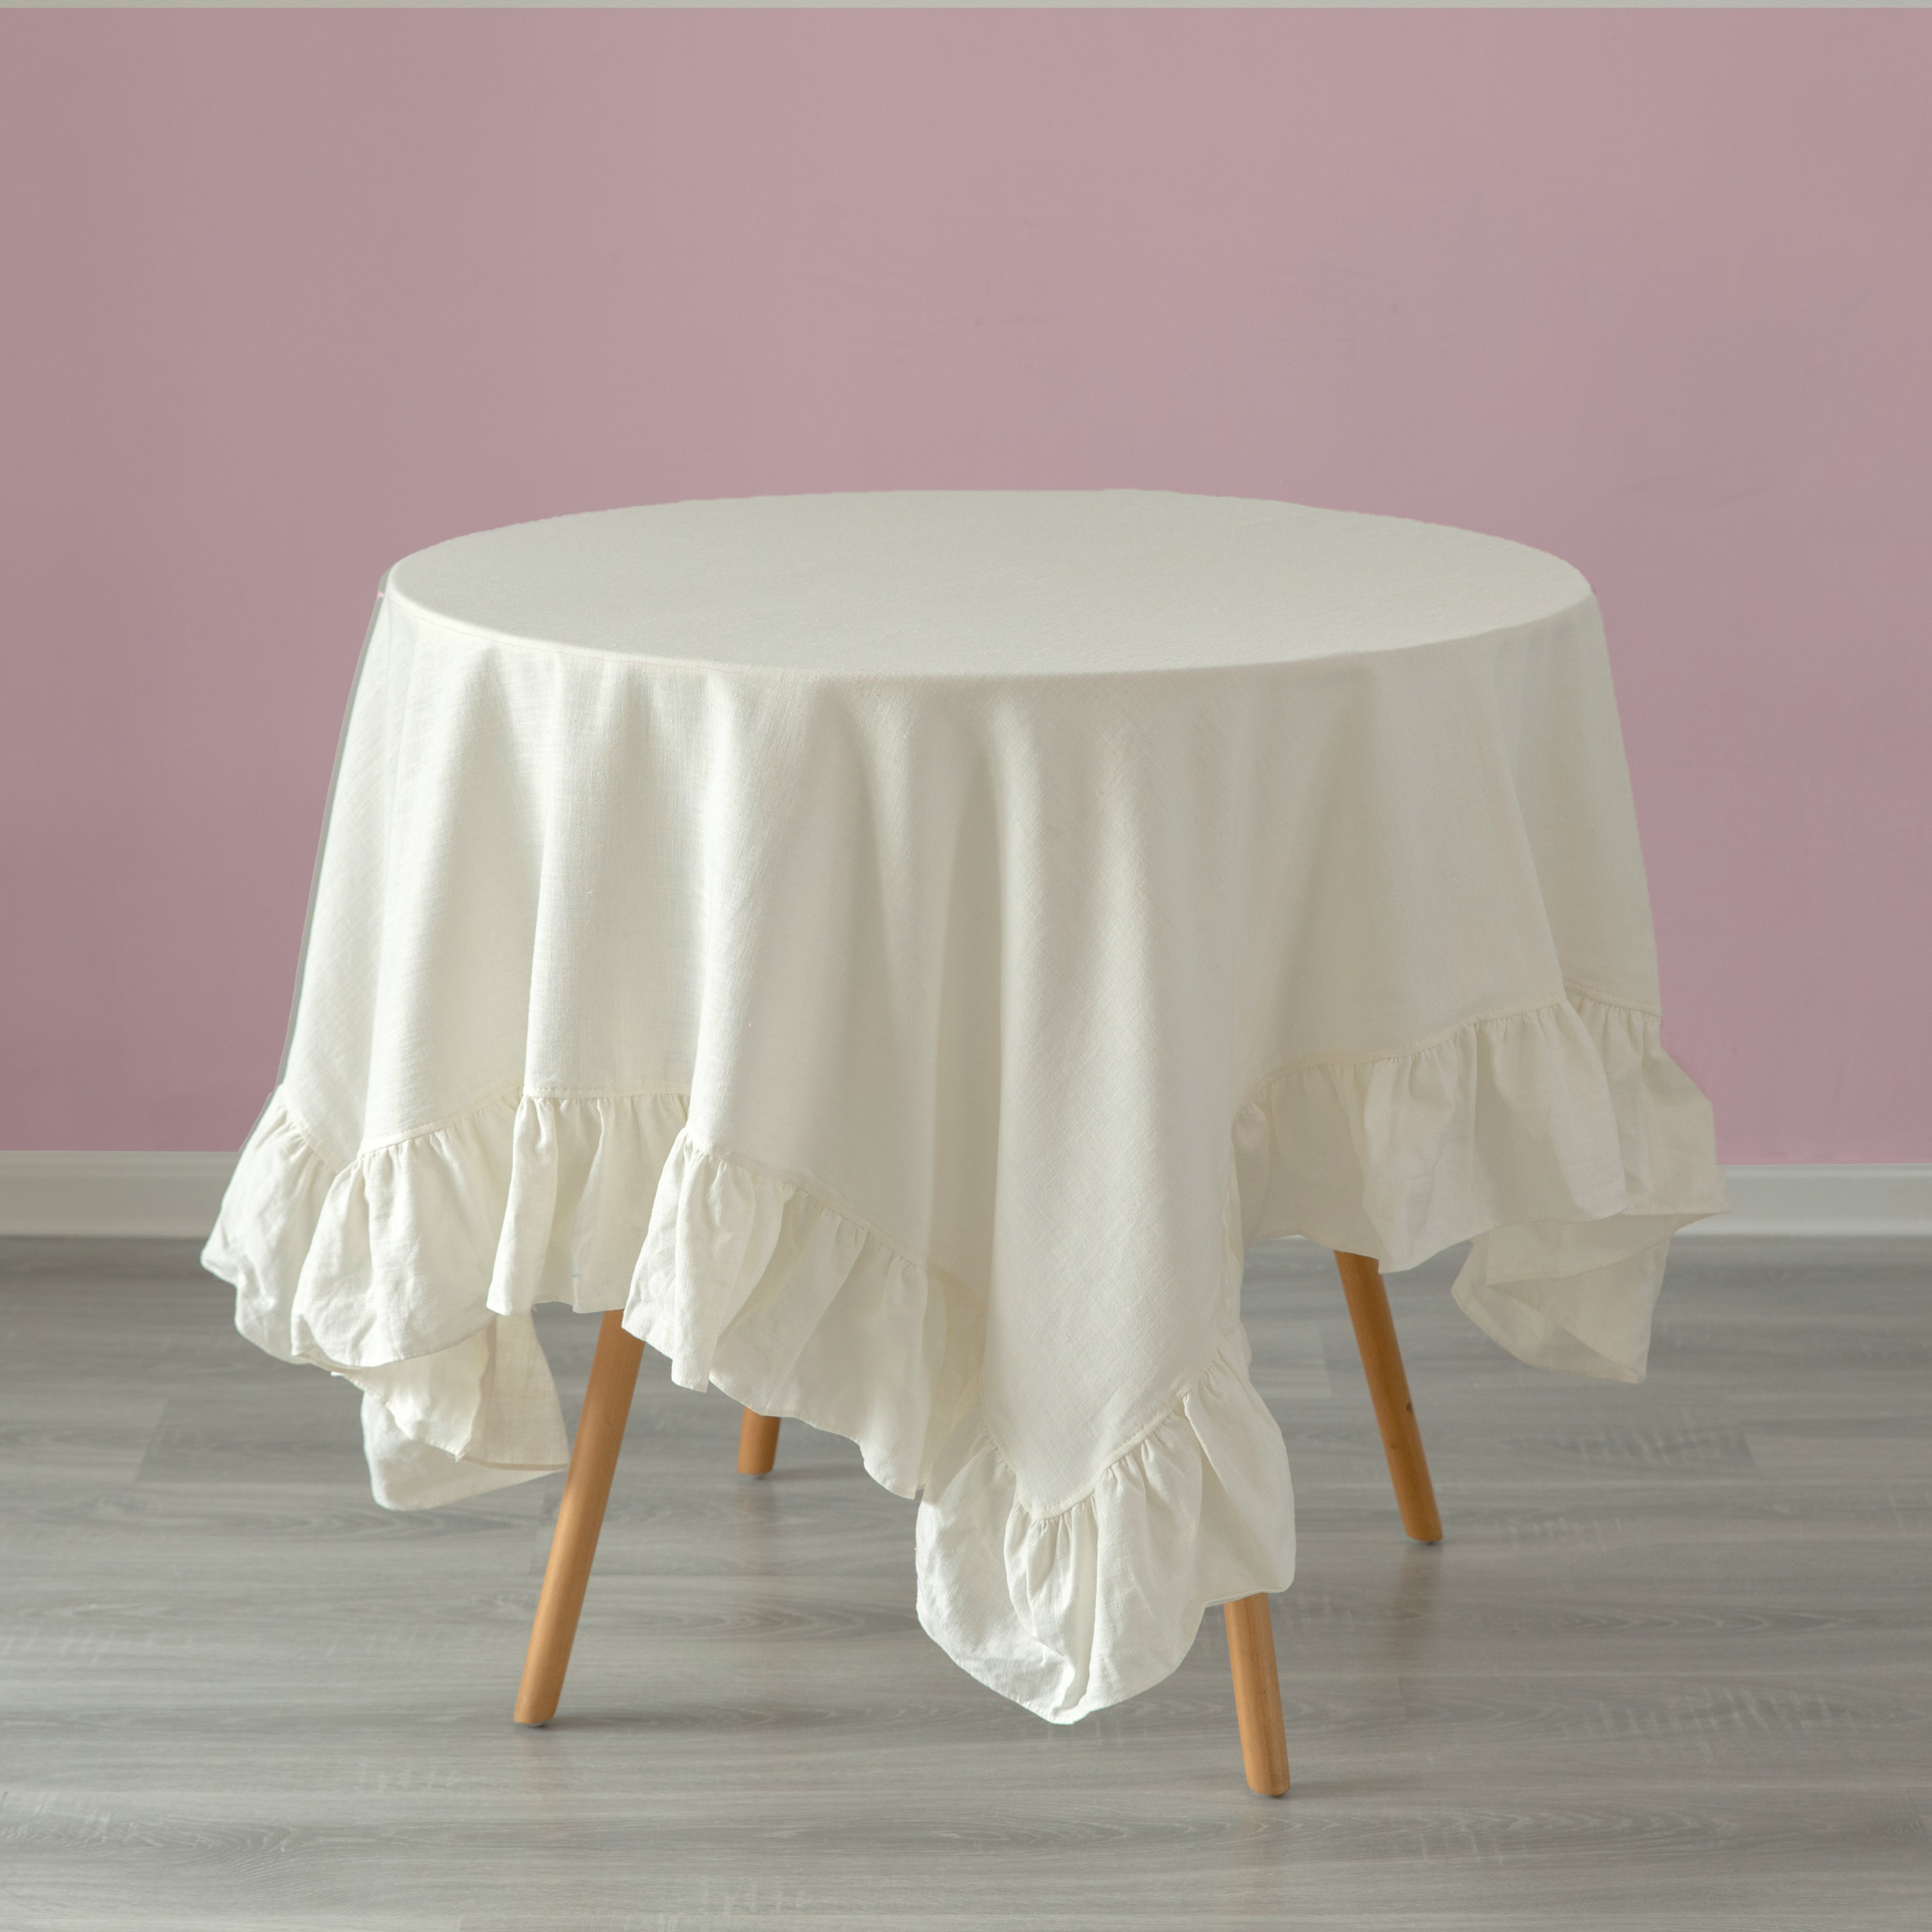 Deerlux 100 Percent Pure Linen Washable Tablecloth With Ruffle Trim - 52 X 70 In. White